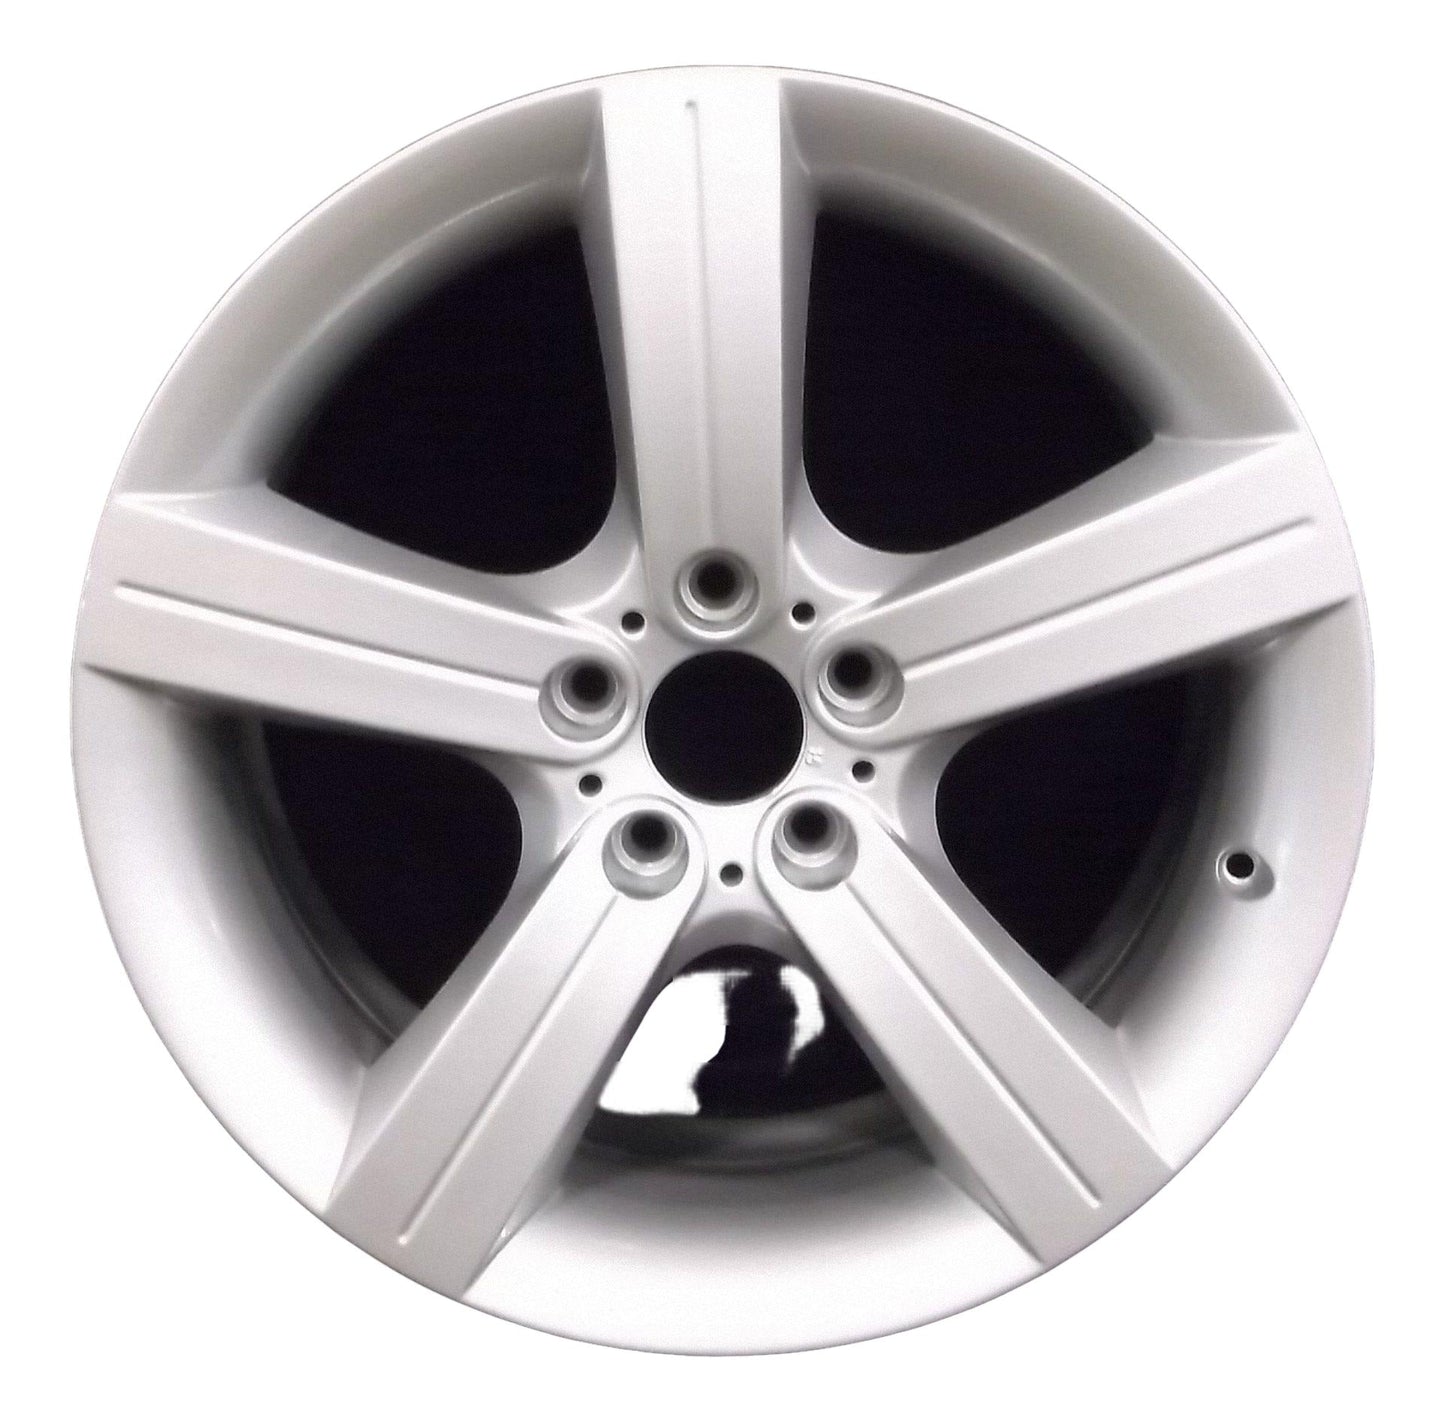 BMW 335i  2007, 2008, 2009, 2010, 2011, 2012, 2013 Factory OEM Car Wheel Size 19x8 Alloy WAO.59598FT.PS15.FF